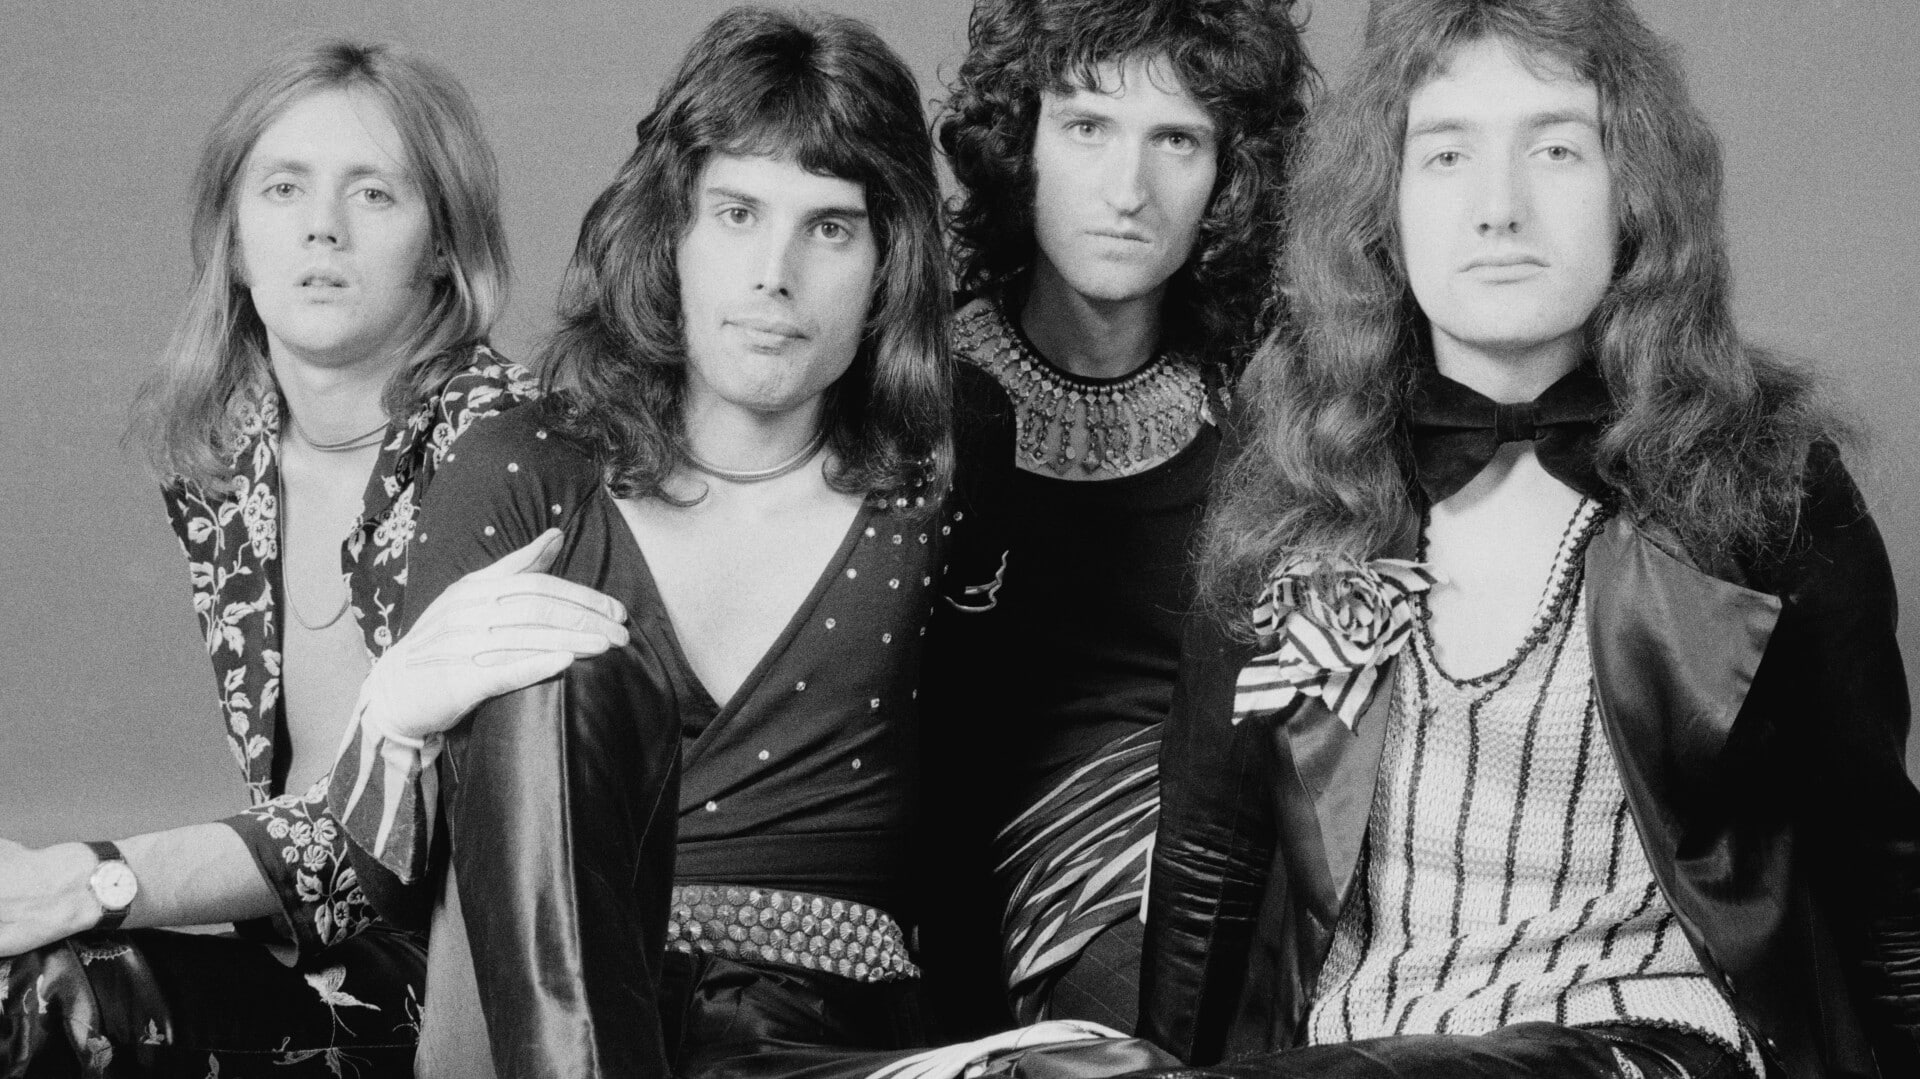 Sony Music to purchase Queen's catalog for over $1B